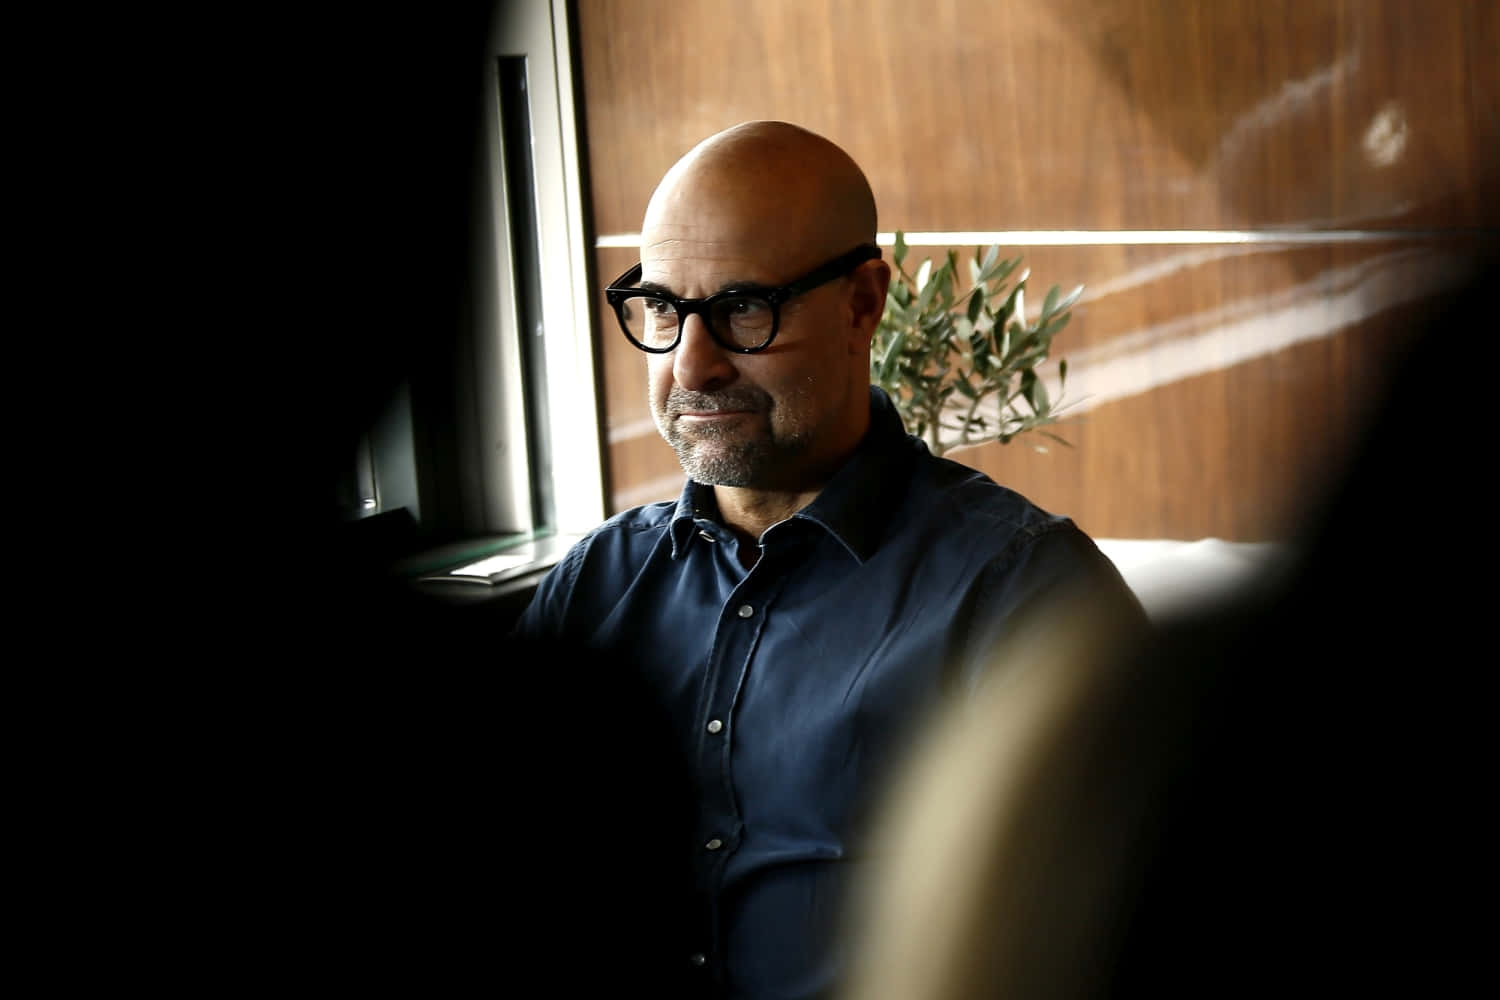 Engaging portrait of Stanley Tucci Wallpaper